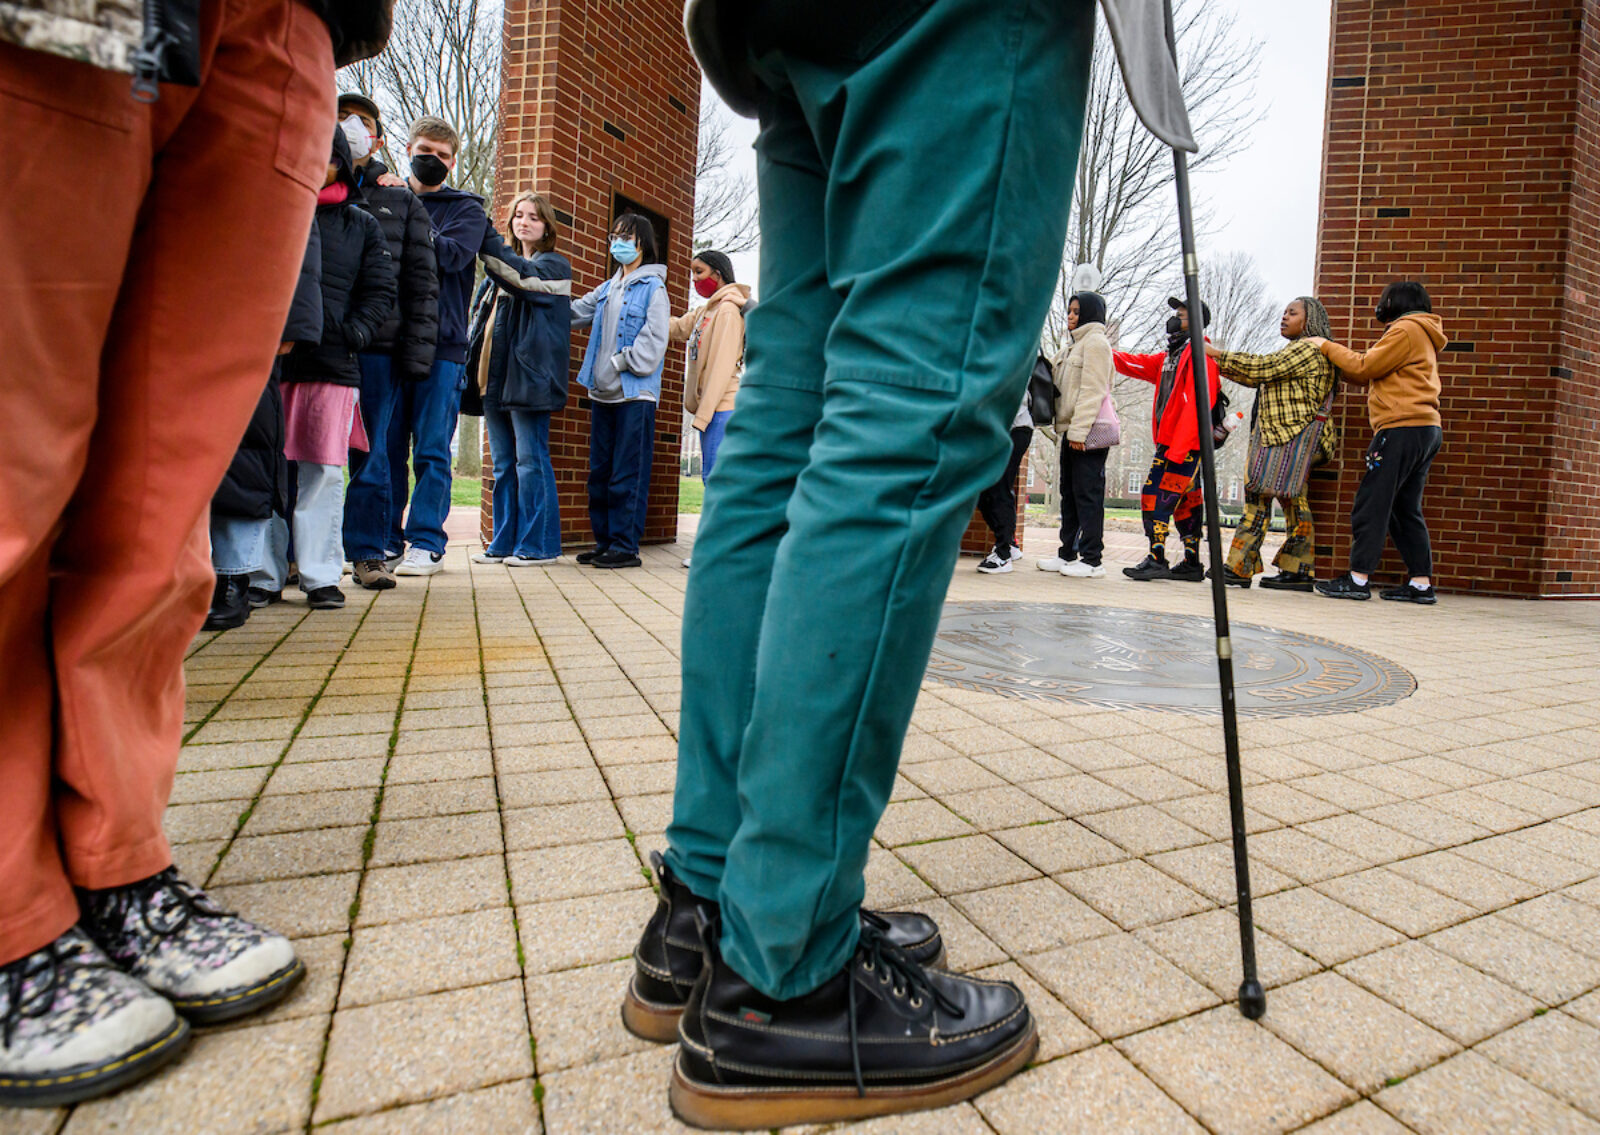 point of view from ground of line of people with person holding walking stick in the foreground